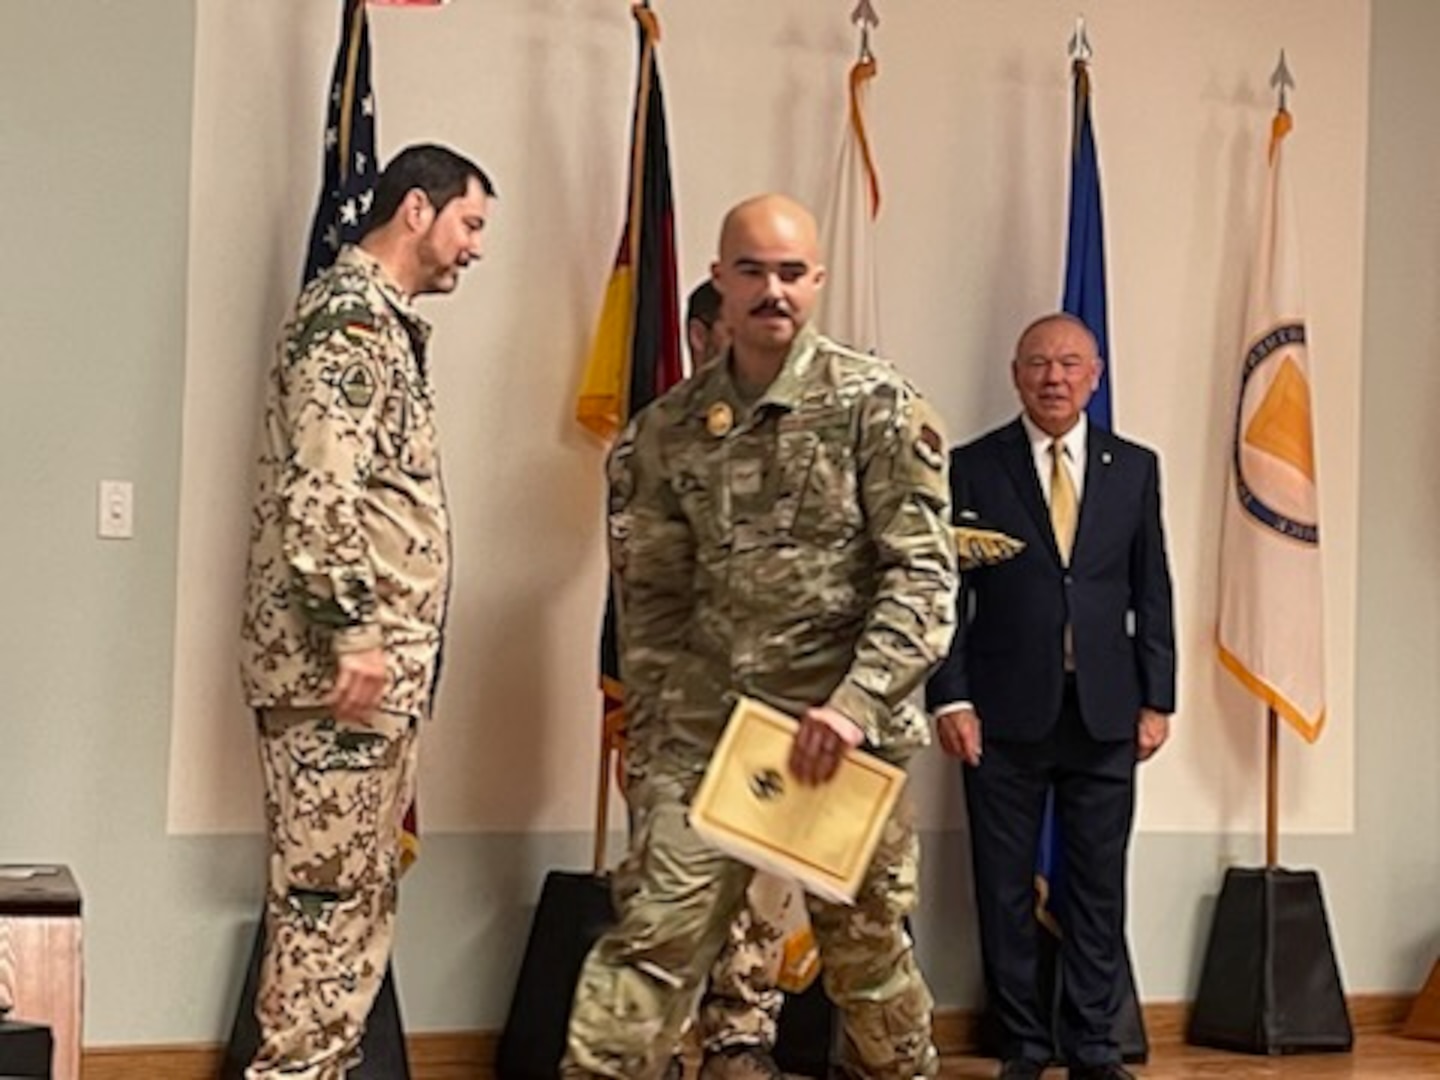 An Airman walks off the stage after receiving his German Armed Forces Proficiency Badge certificate.